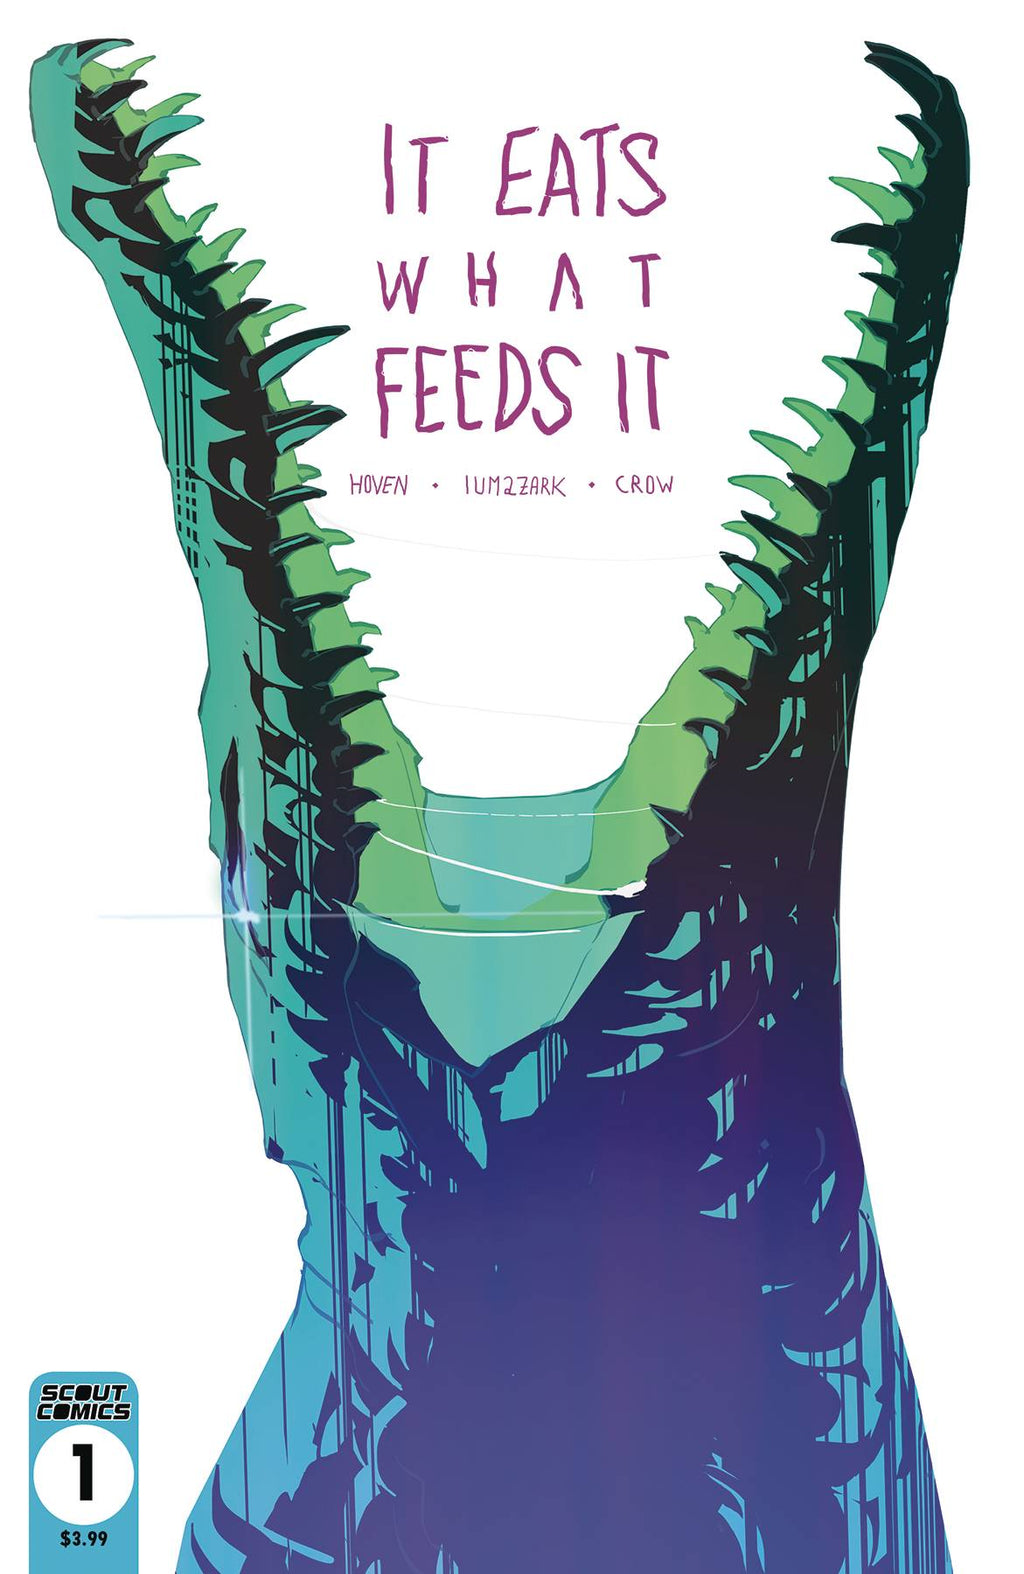 It Eats What Feeds It #1 - 2nd Printing